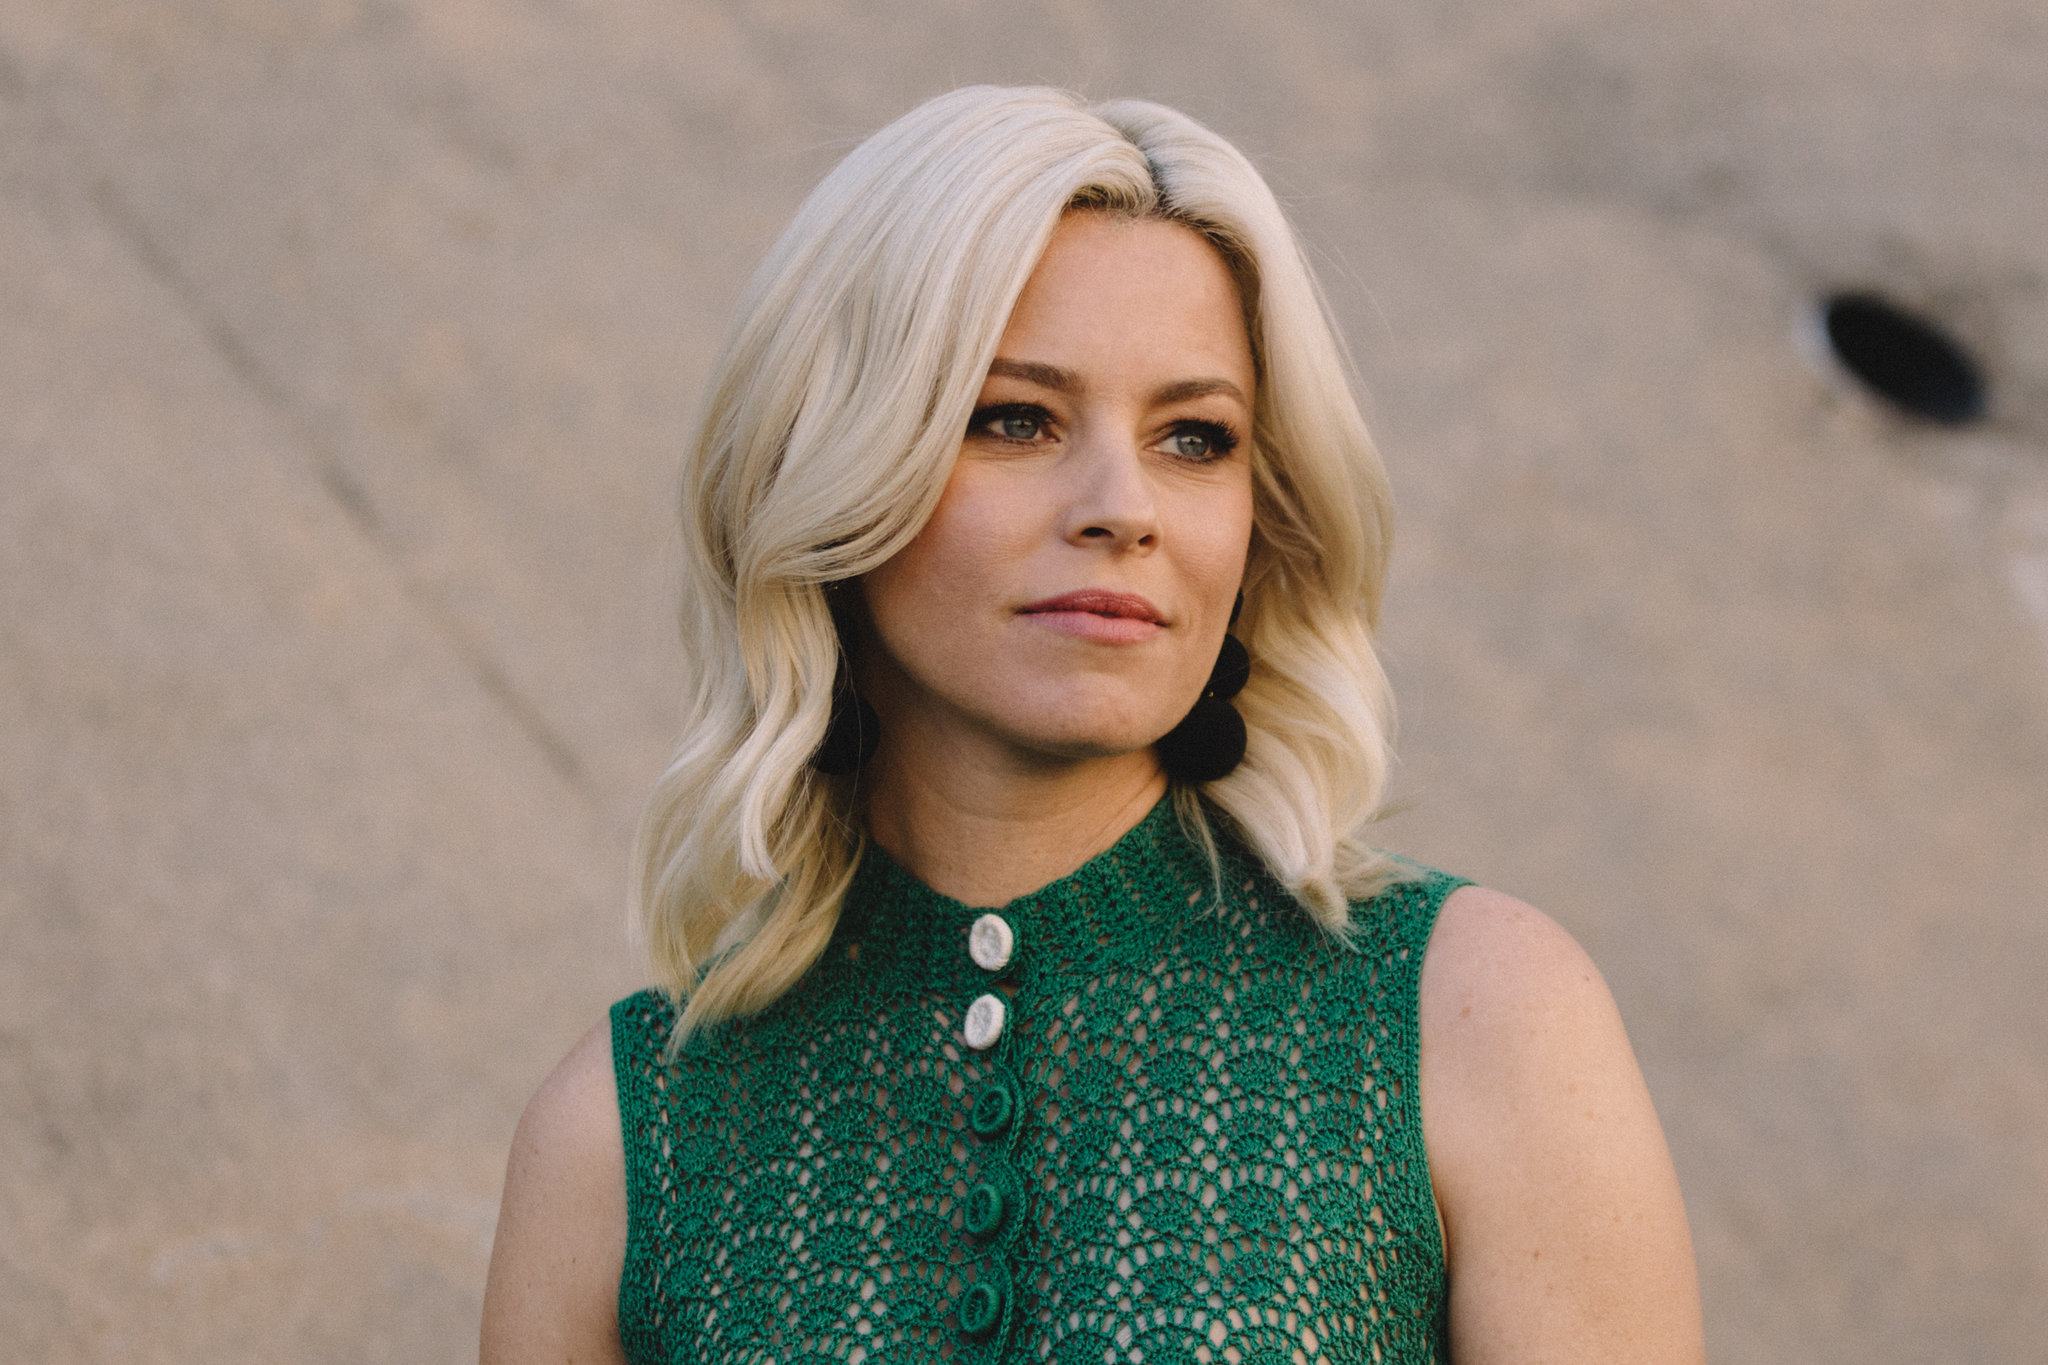 Elizabeth Banks Wiki, Bio, Age, Net Worth, and Other Facts